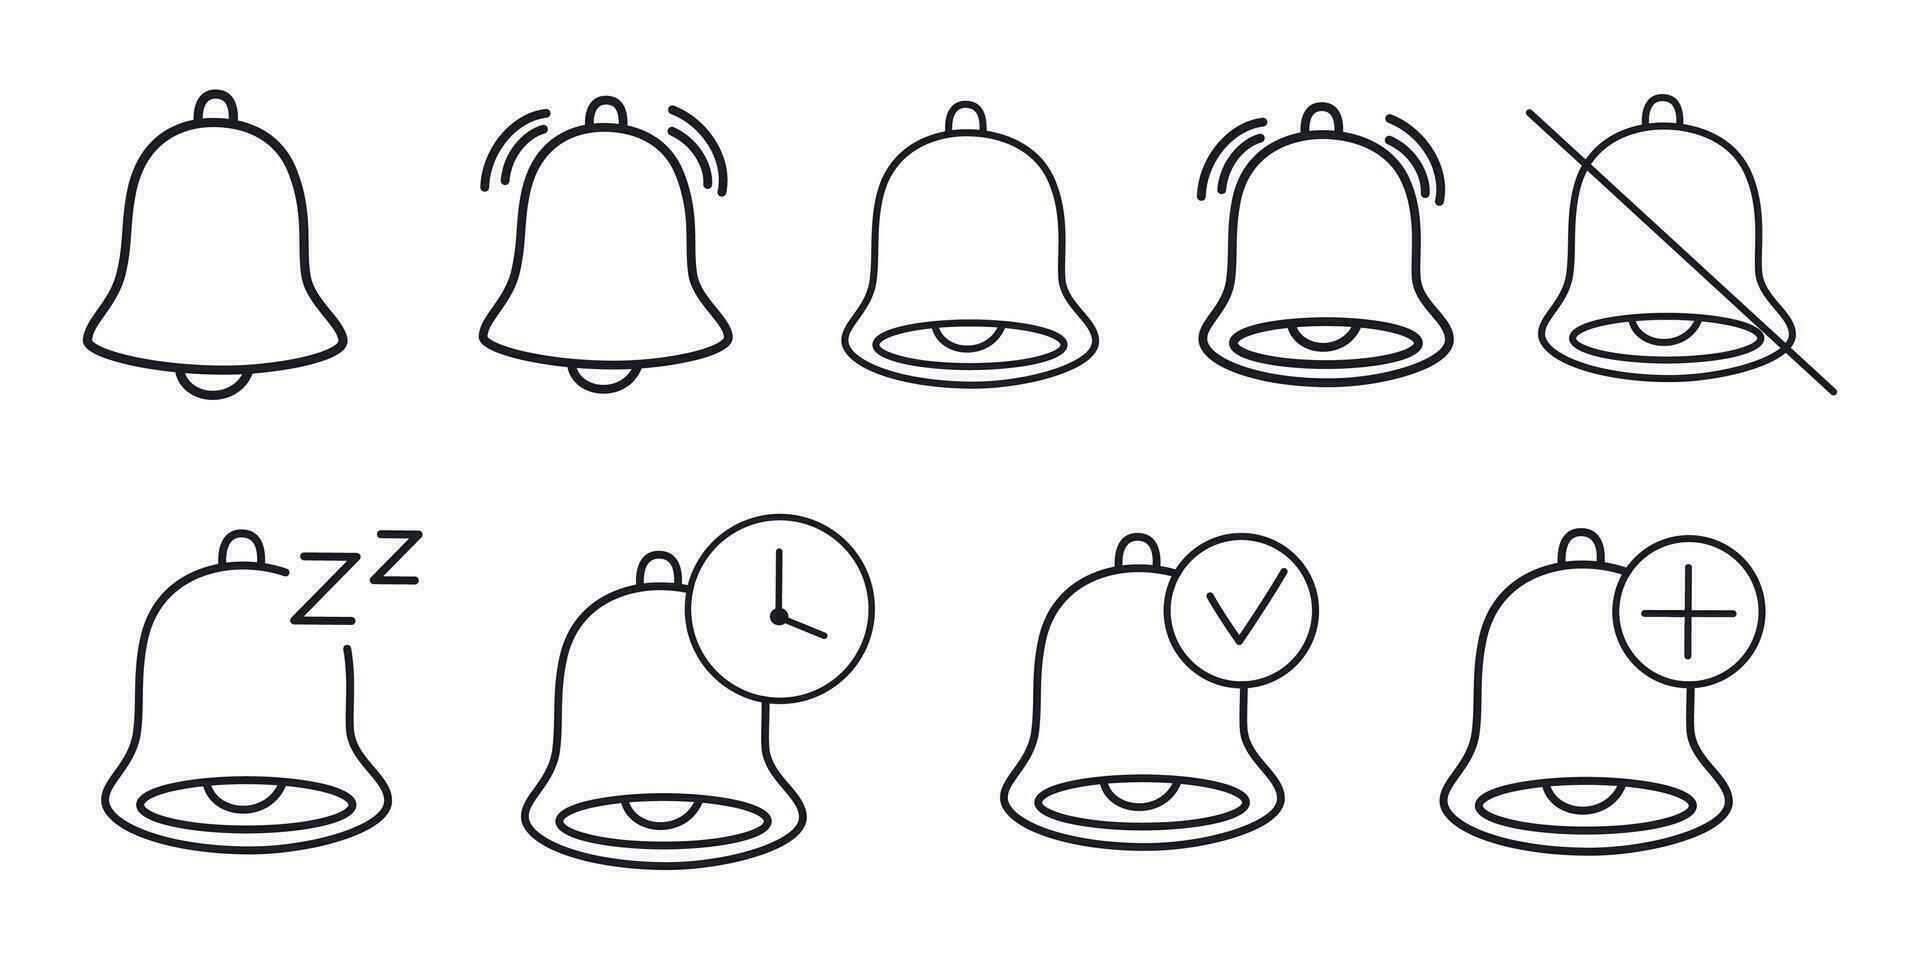 Notification bells icon. Incoming inbox message, new message, ringing bell, alarm alert. Concept editable stroke outline line icons set flat vector illustration.  64 x 64.